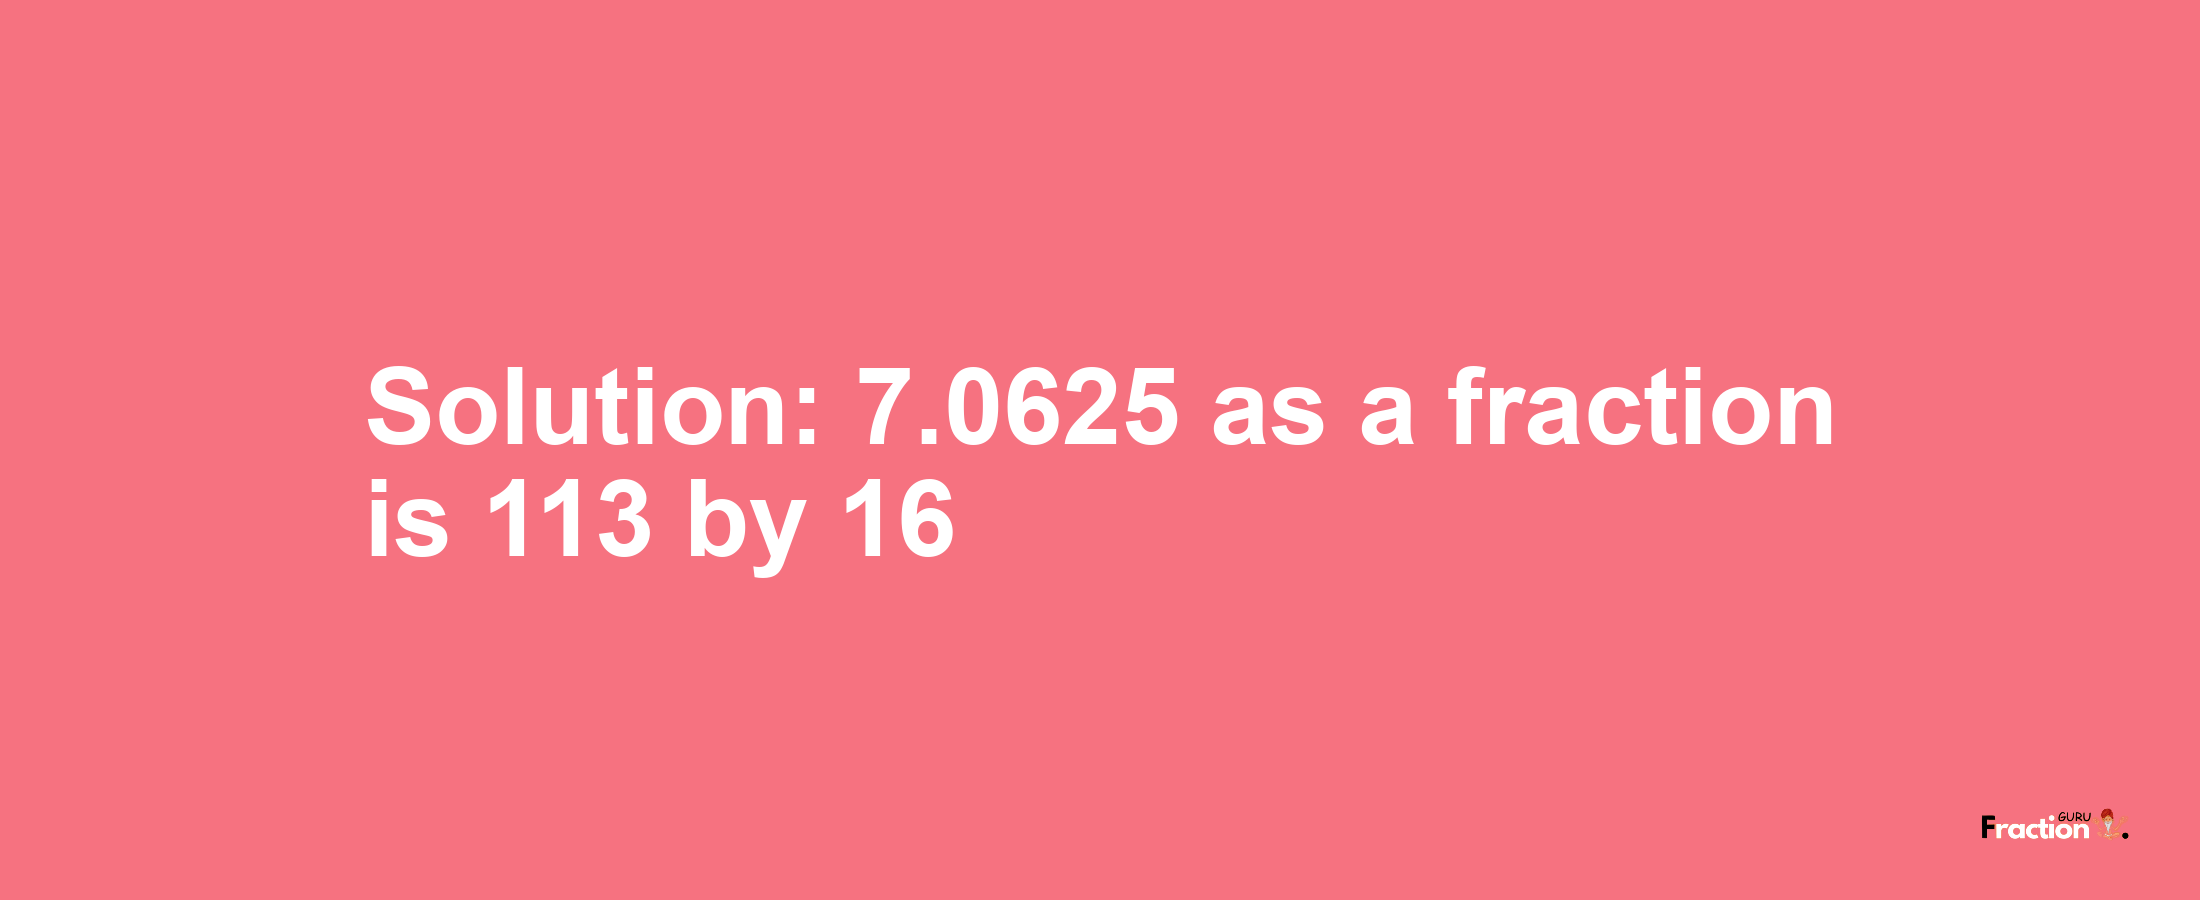 Solution:7.0625 as a fraction is 113/16